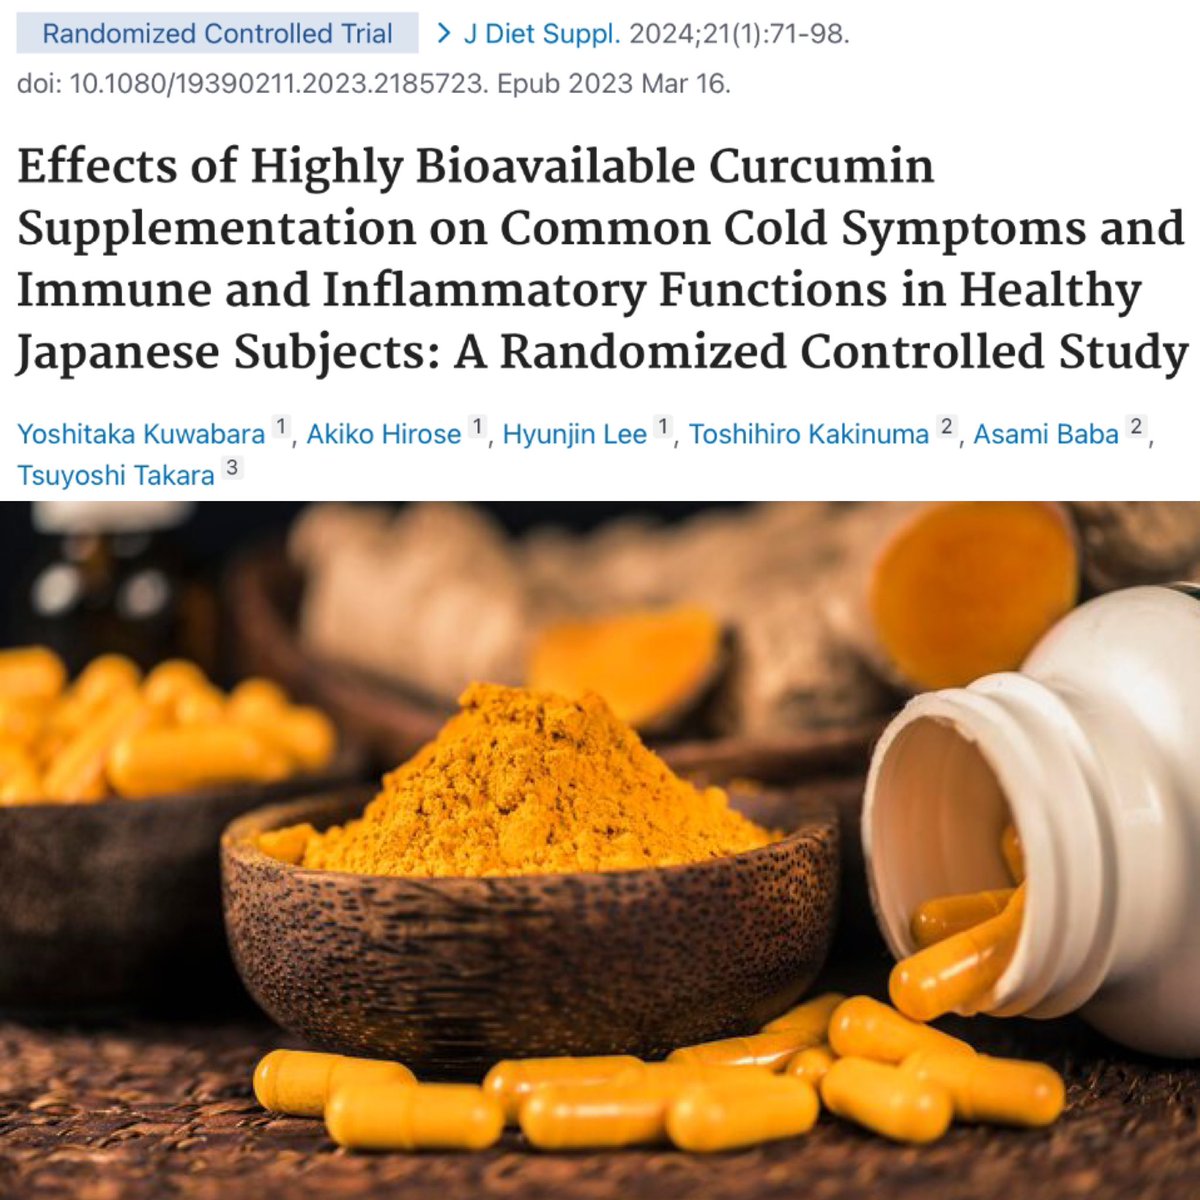 Curcumin supplementation ⬇️ common cold symptoms 🦠

This new study investigated the effects of two curcumin supplements vs placebo on common cold symptoms over 12 weeks 💊 

Results:

150 mg/day of either curcumin supplement significantly ⬇️ the number of days participants had…